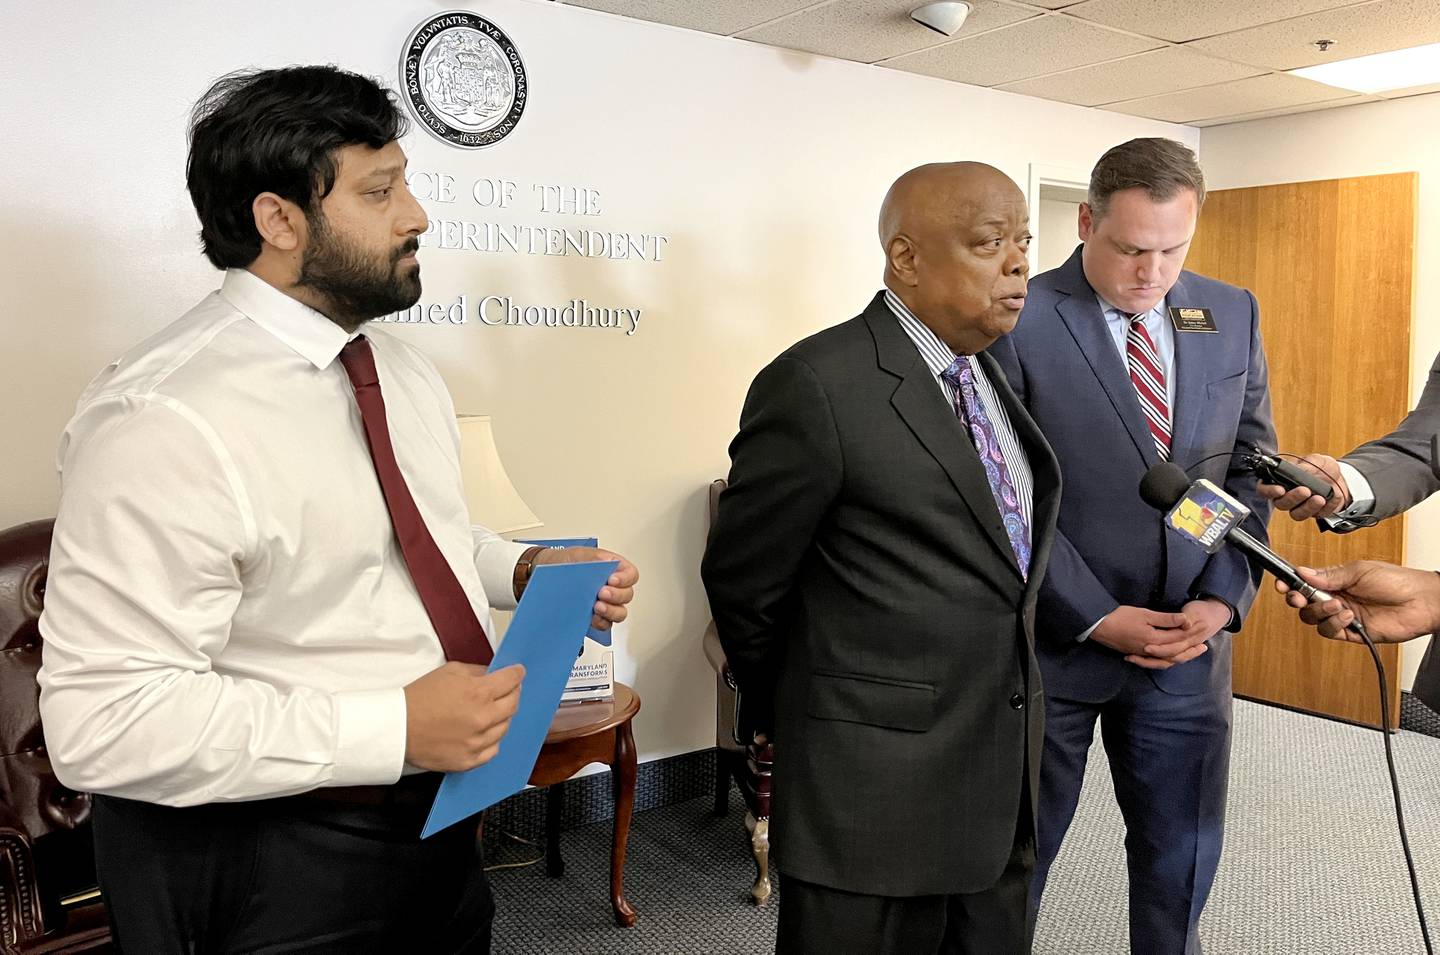 Maryland State Superintendent of Schools Mohammed Choudhury, state school board president Clarence Crawford and school board vice president Josh Michael at a press conference in August.